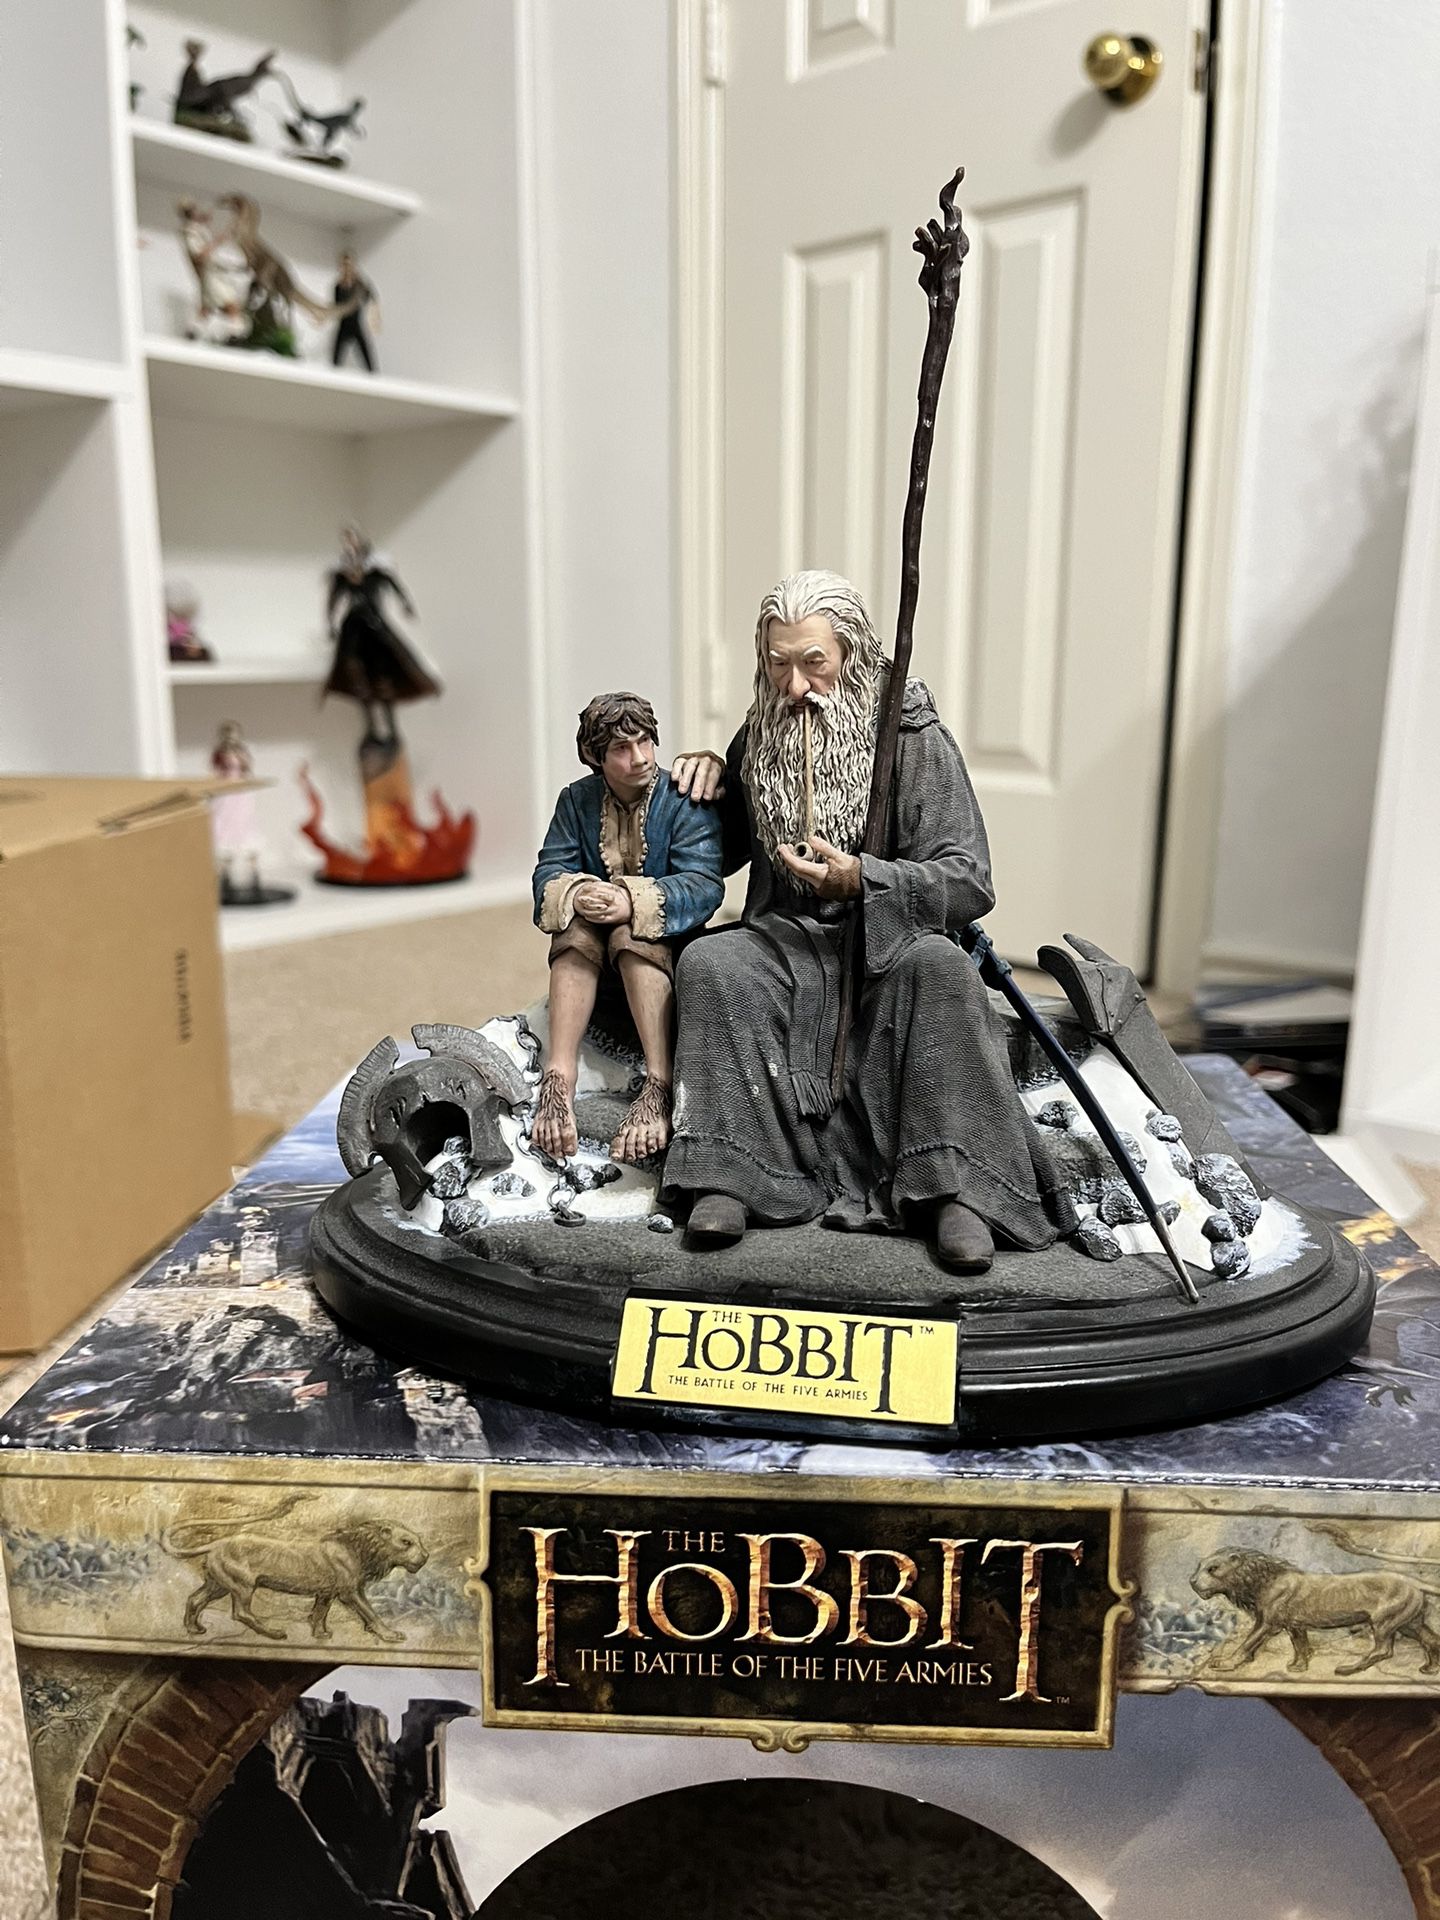 The Hobbit The Battle of the Five Armies Limited Edtion - Statue Only, no discs